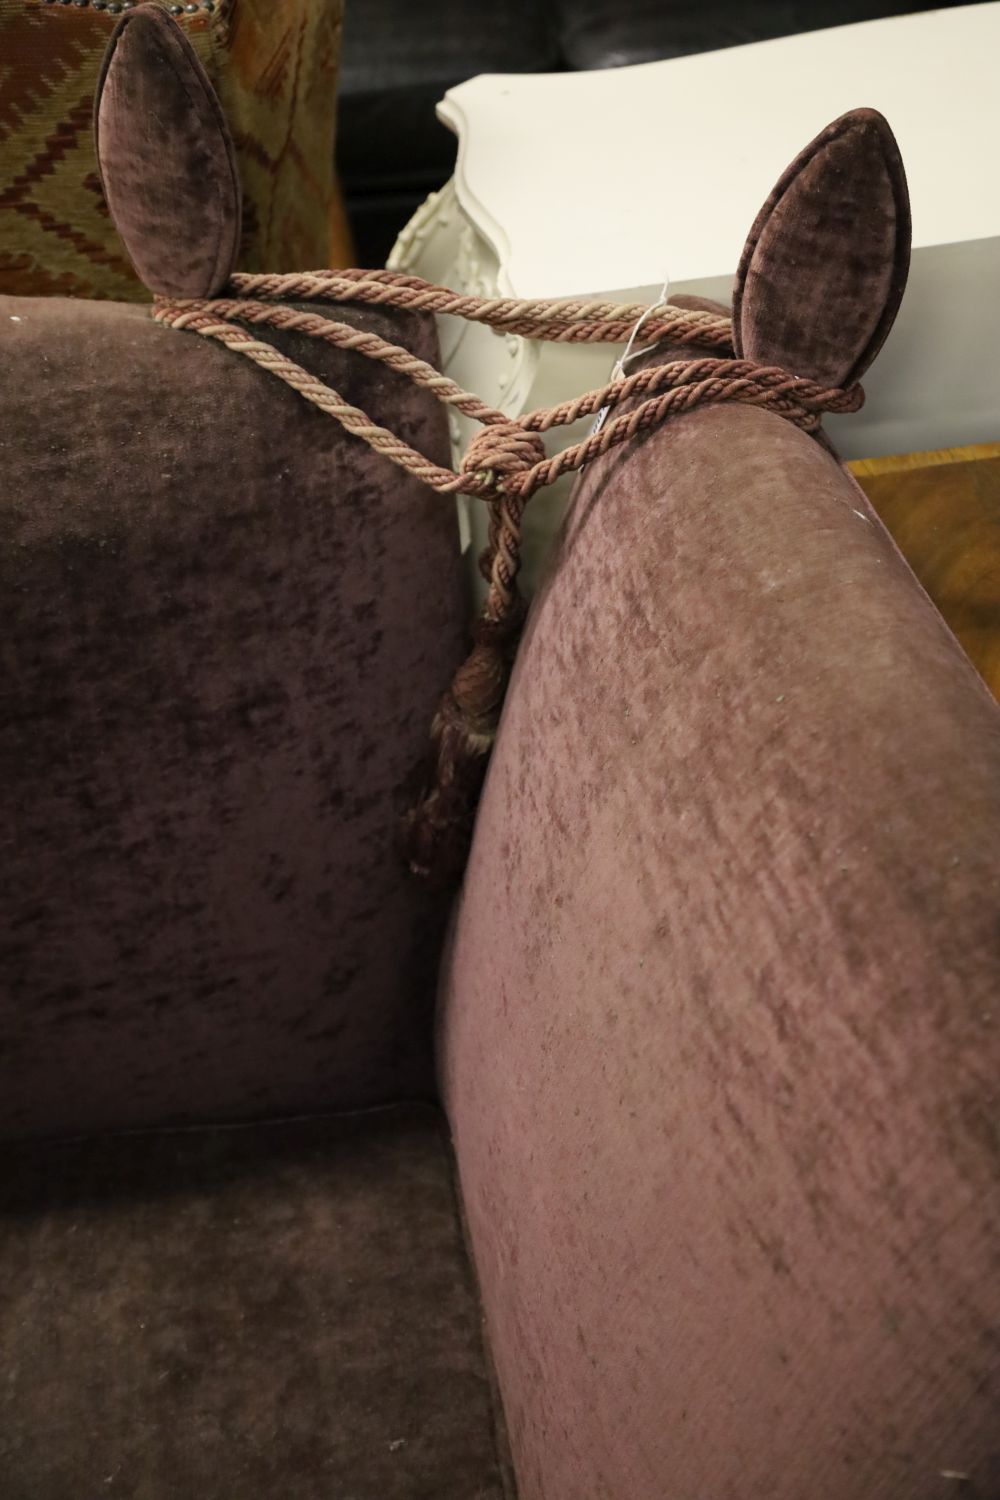 A Knole settee upholstered in mauve fabric, 170 x 80cm, height 92cm